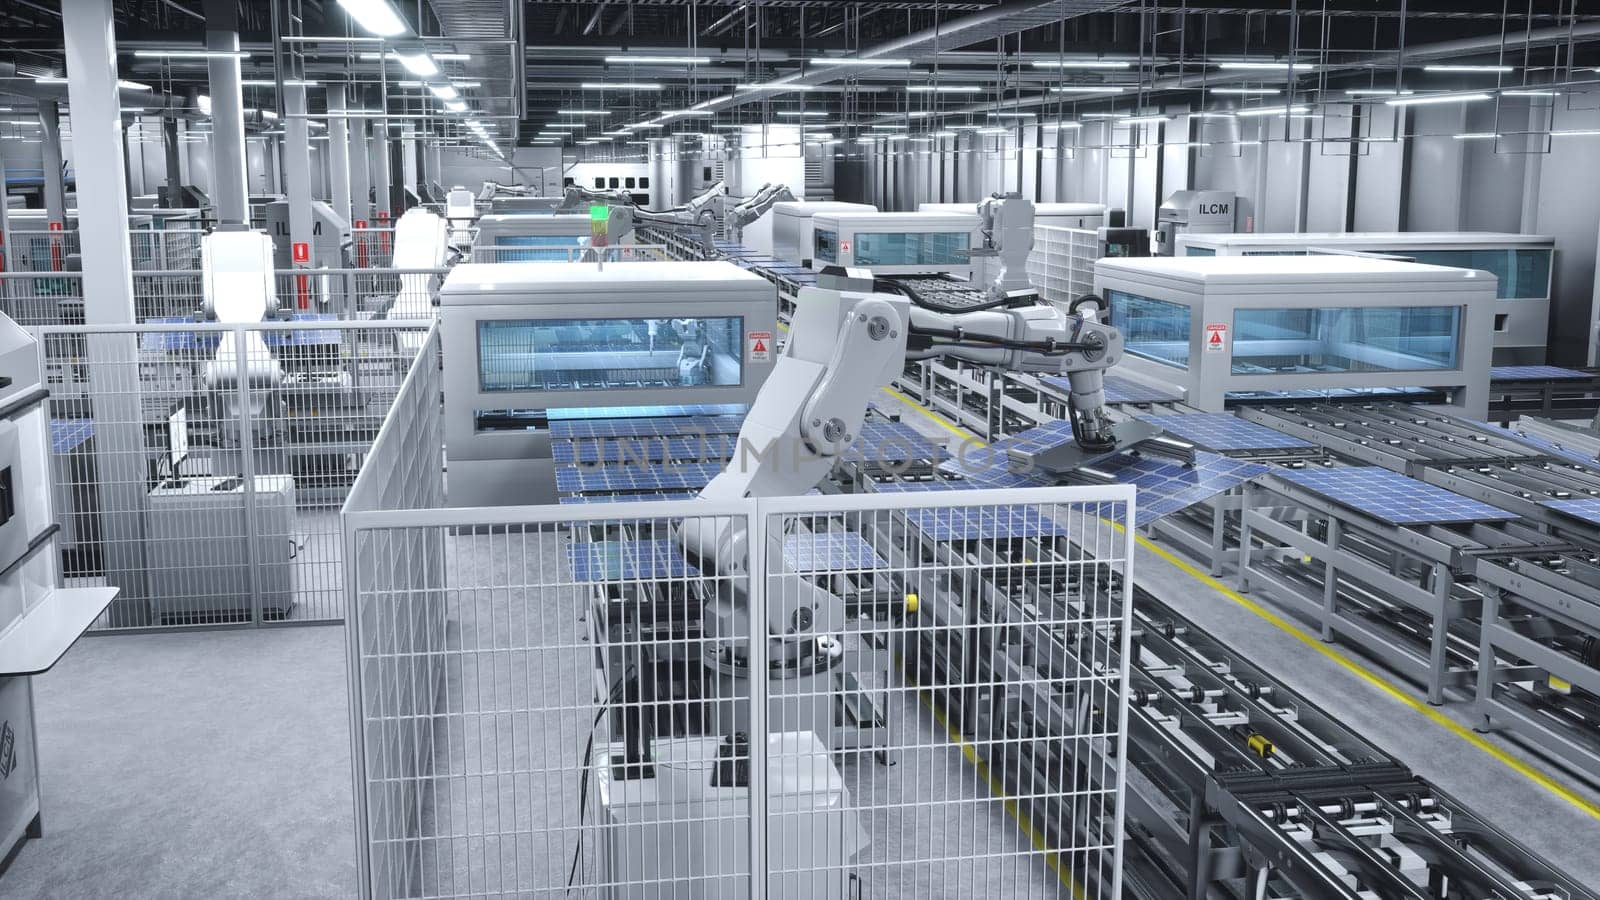 Industrial robot arms placing solar panels on large production line by DCStudio